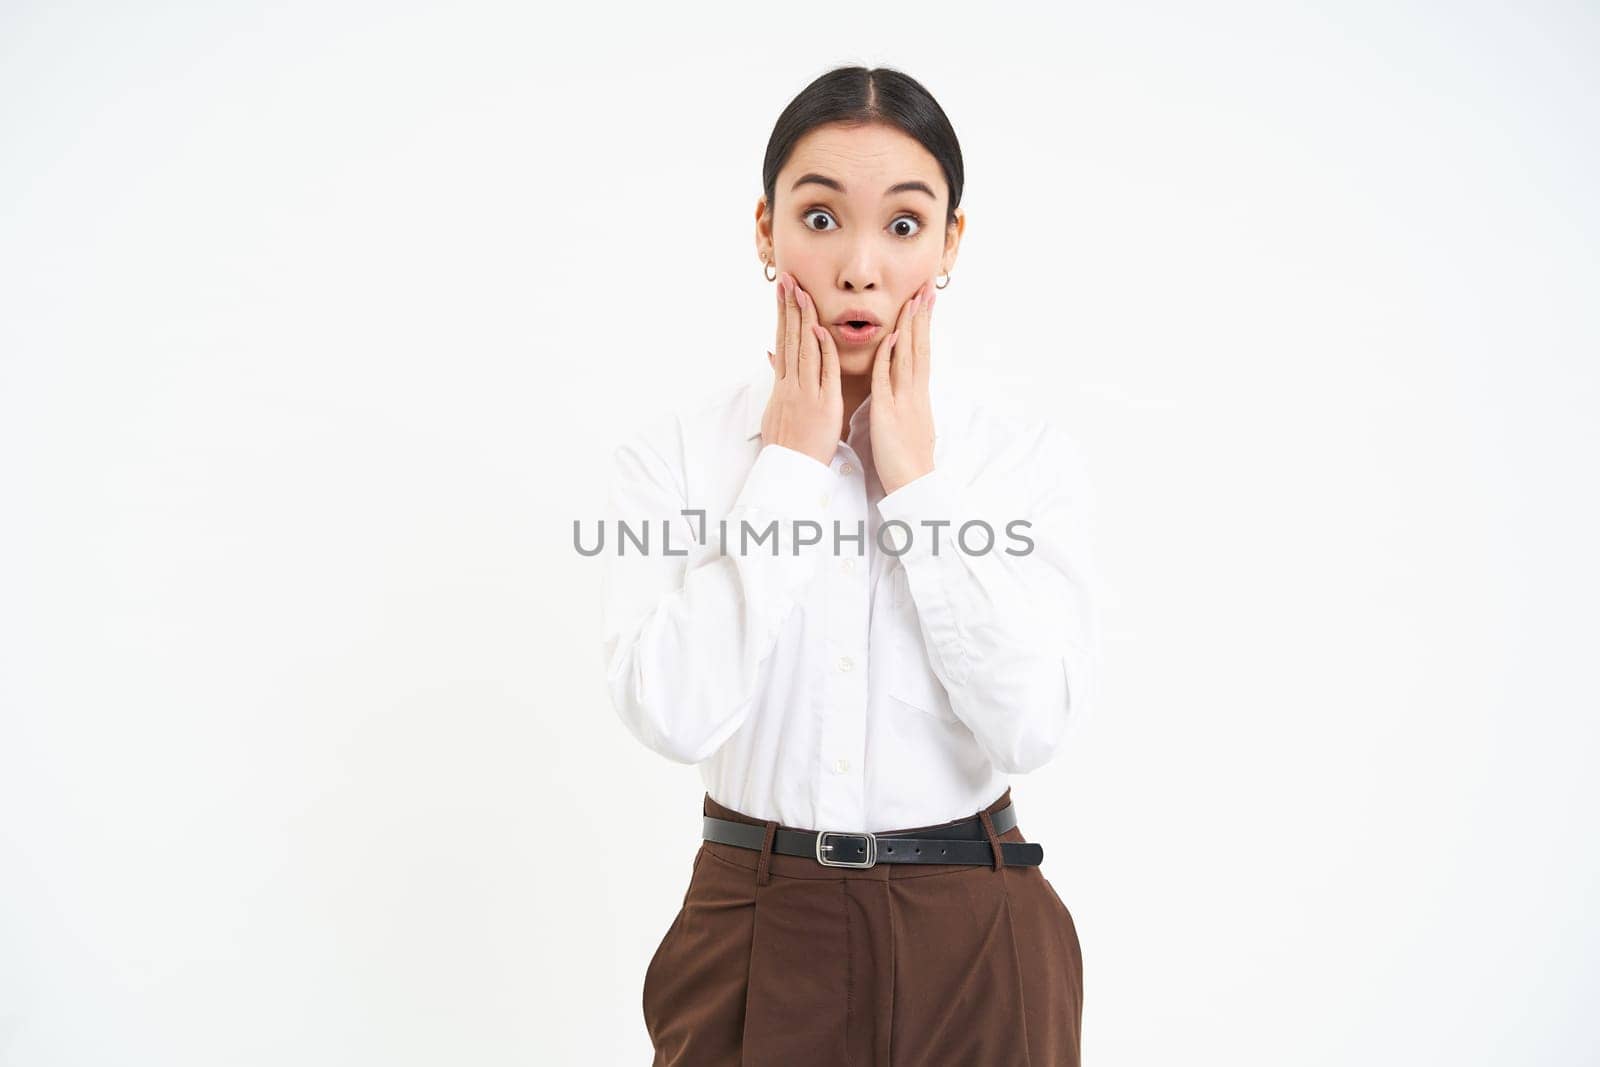 Corporate woman looks amazed, holds hands near face with surprised face expression, isolated on white background.